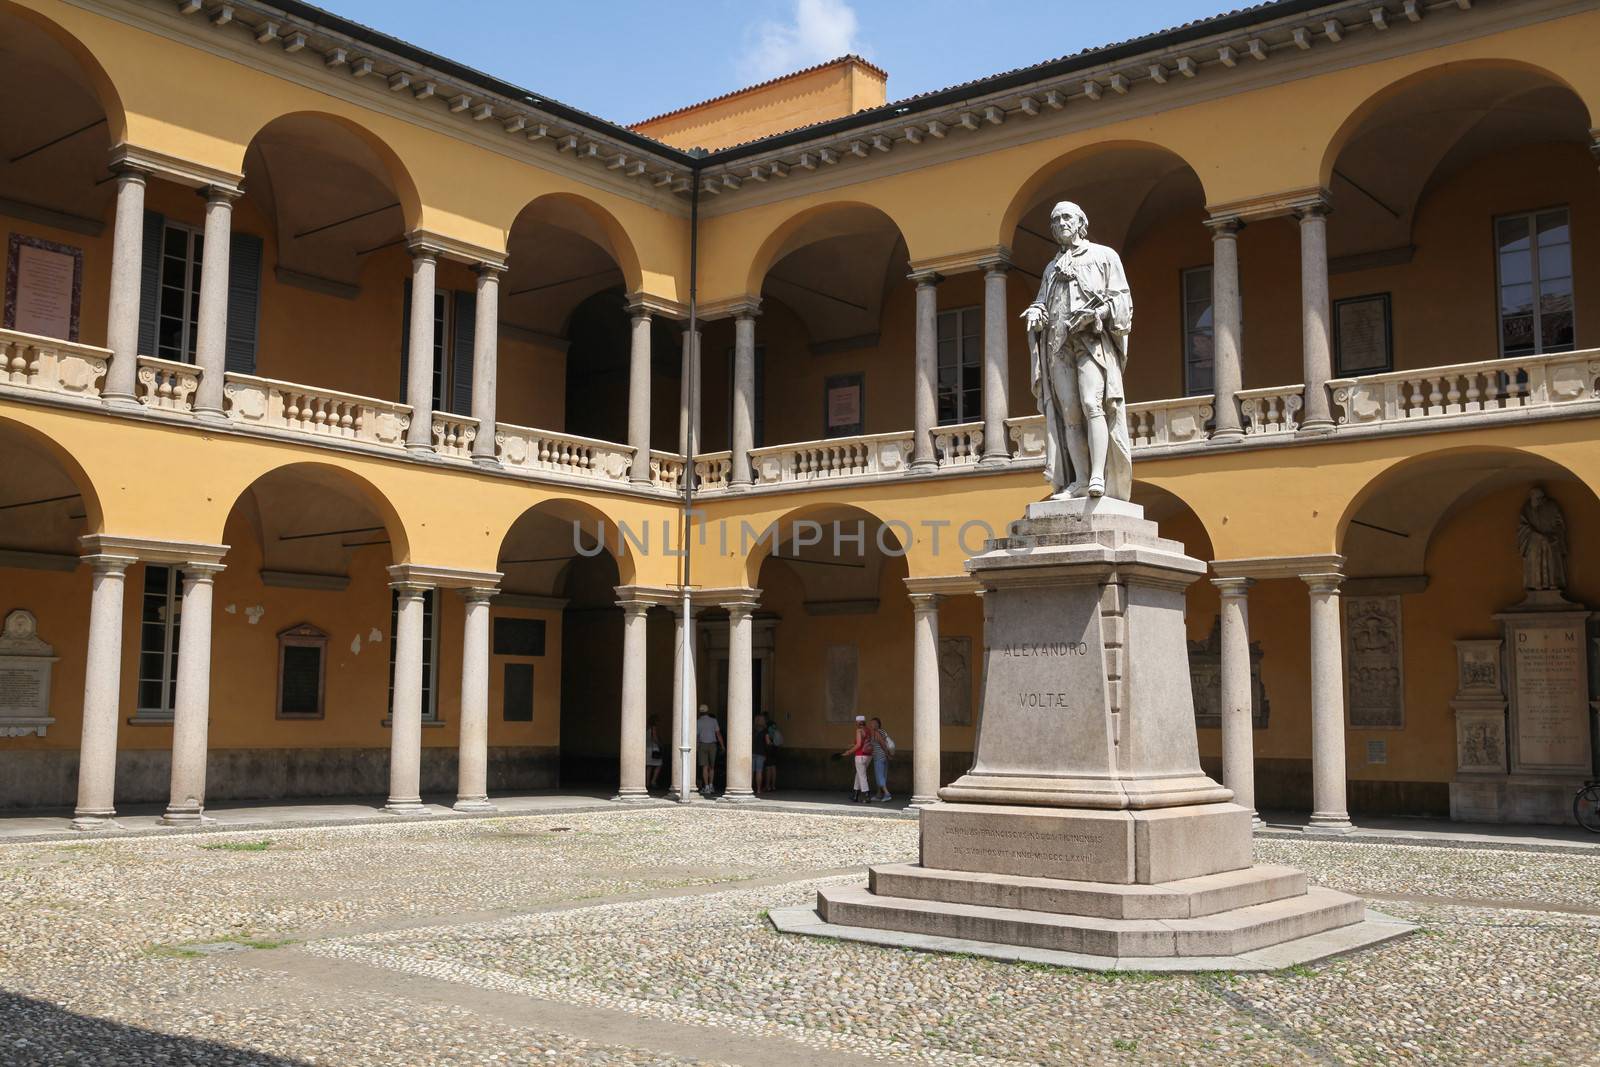 Pavia, Italy – July 9, 2013: View at the courtyard of the University of Pavia in the town of Pavia, northern Italy, with a monument of famous scientist Alessandro Volta and a group of people in the arched passageway.